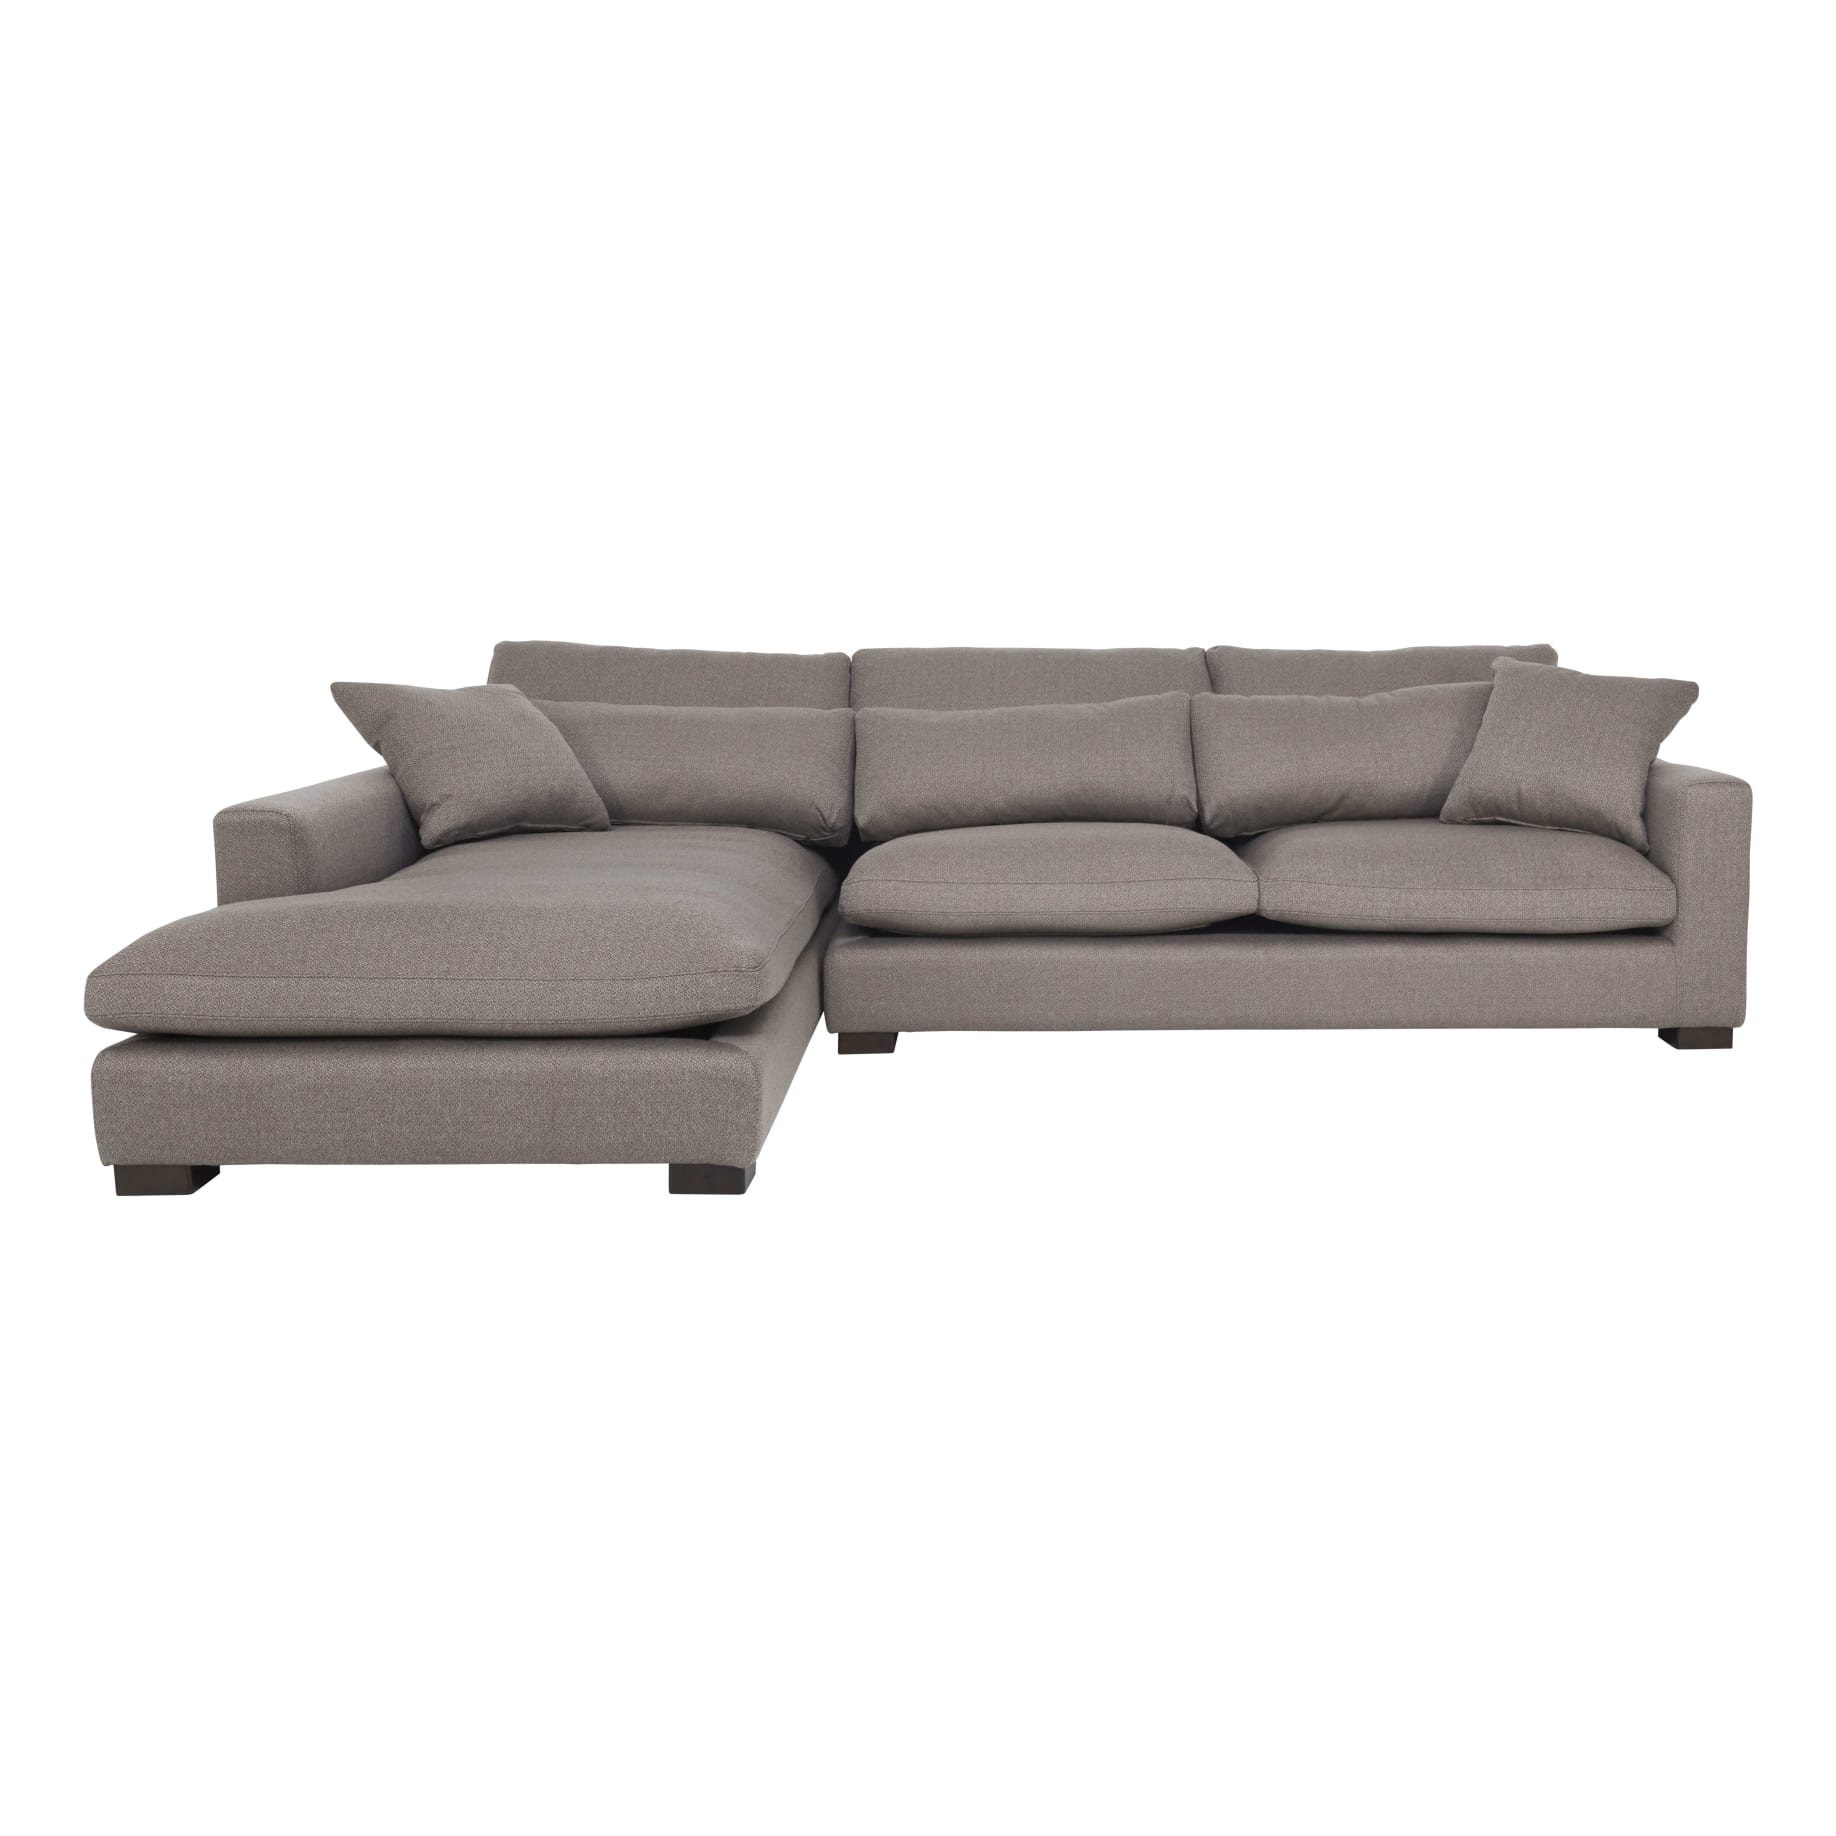 Cleo 3 Seater + Chaise LHF in Gusto Taupe